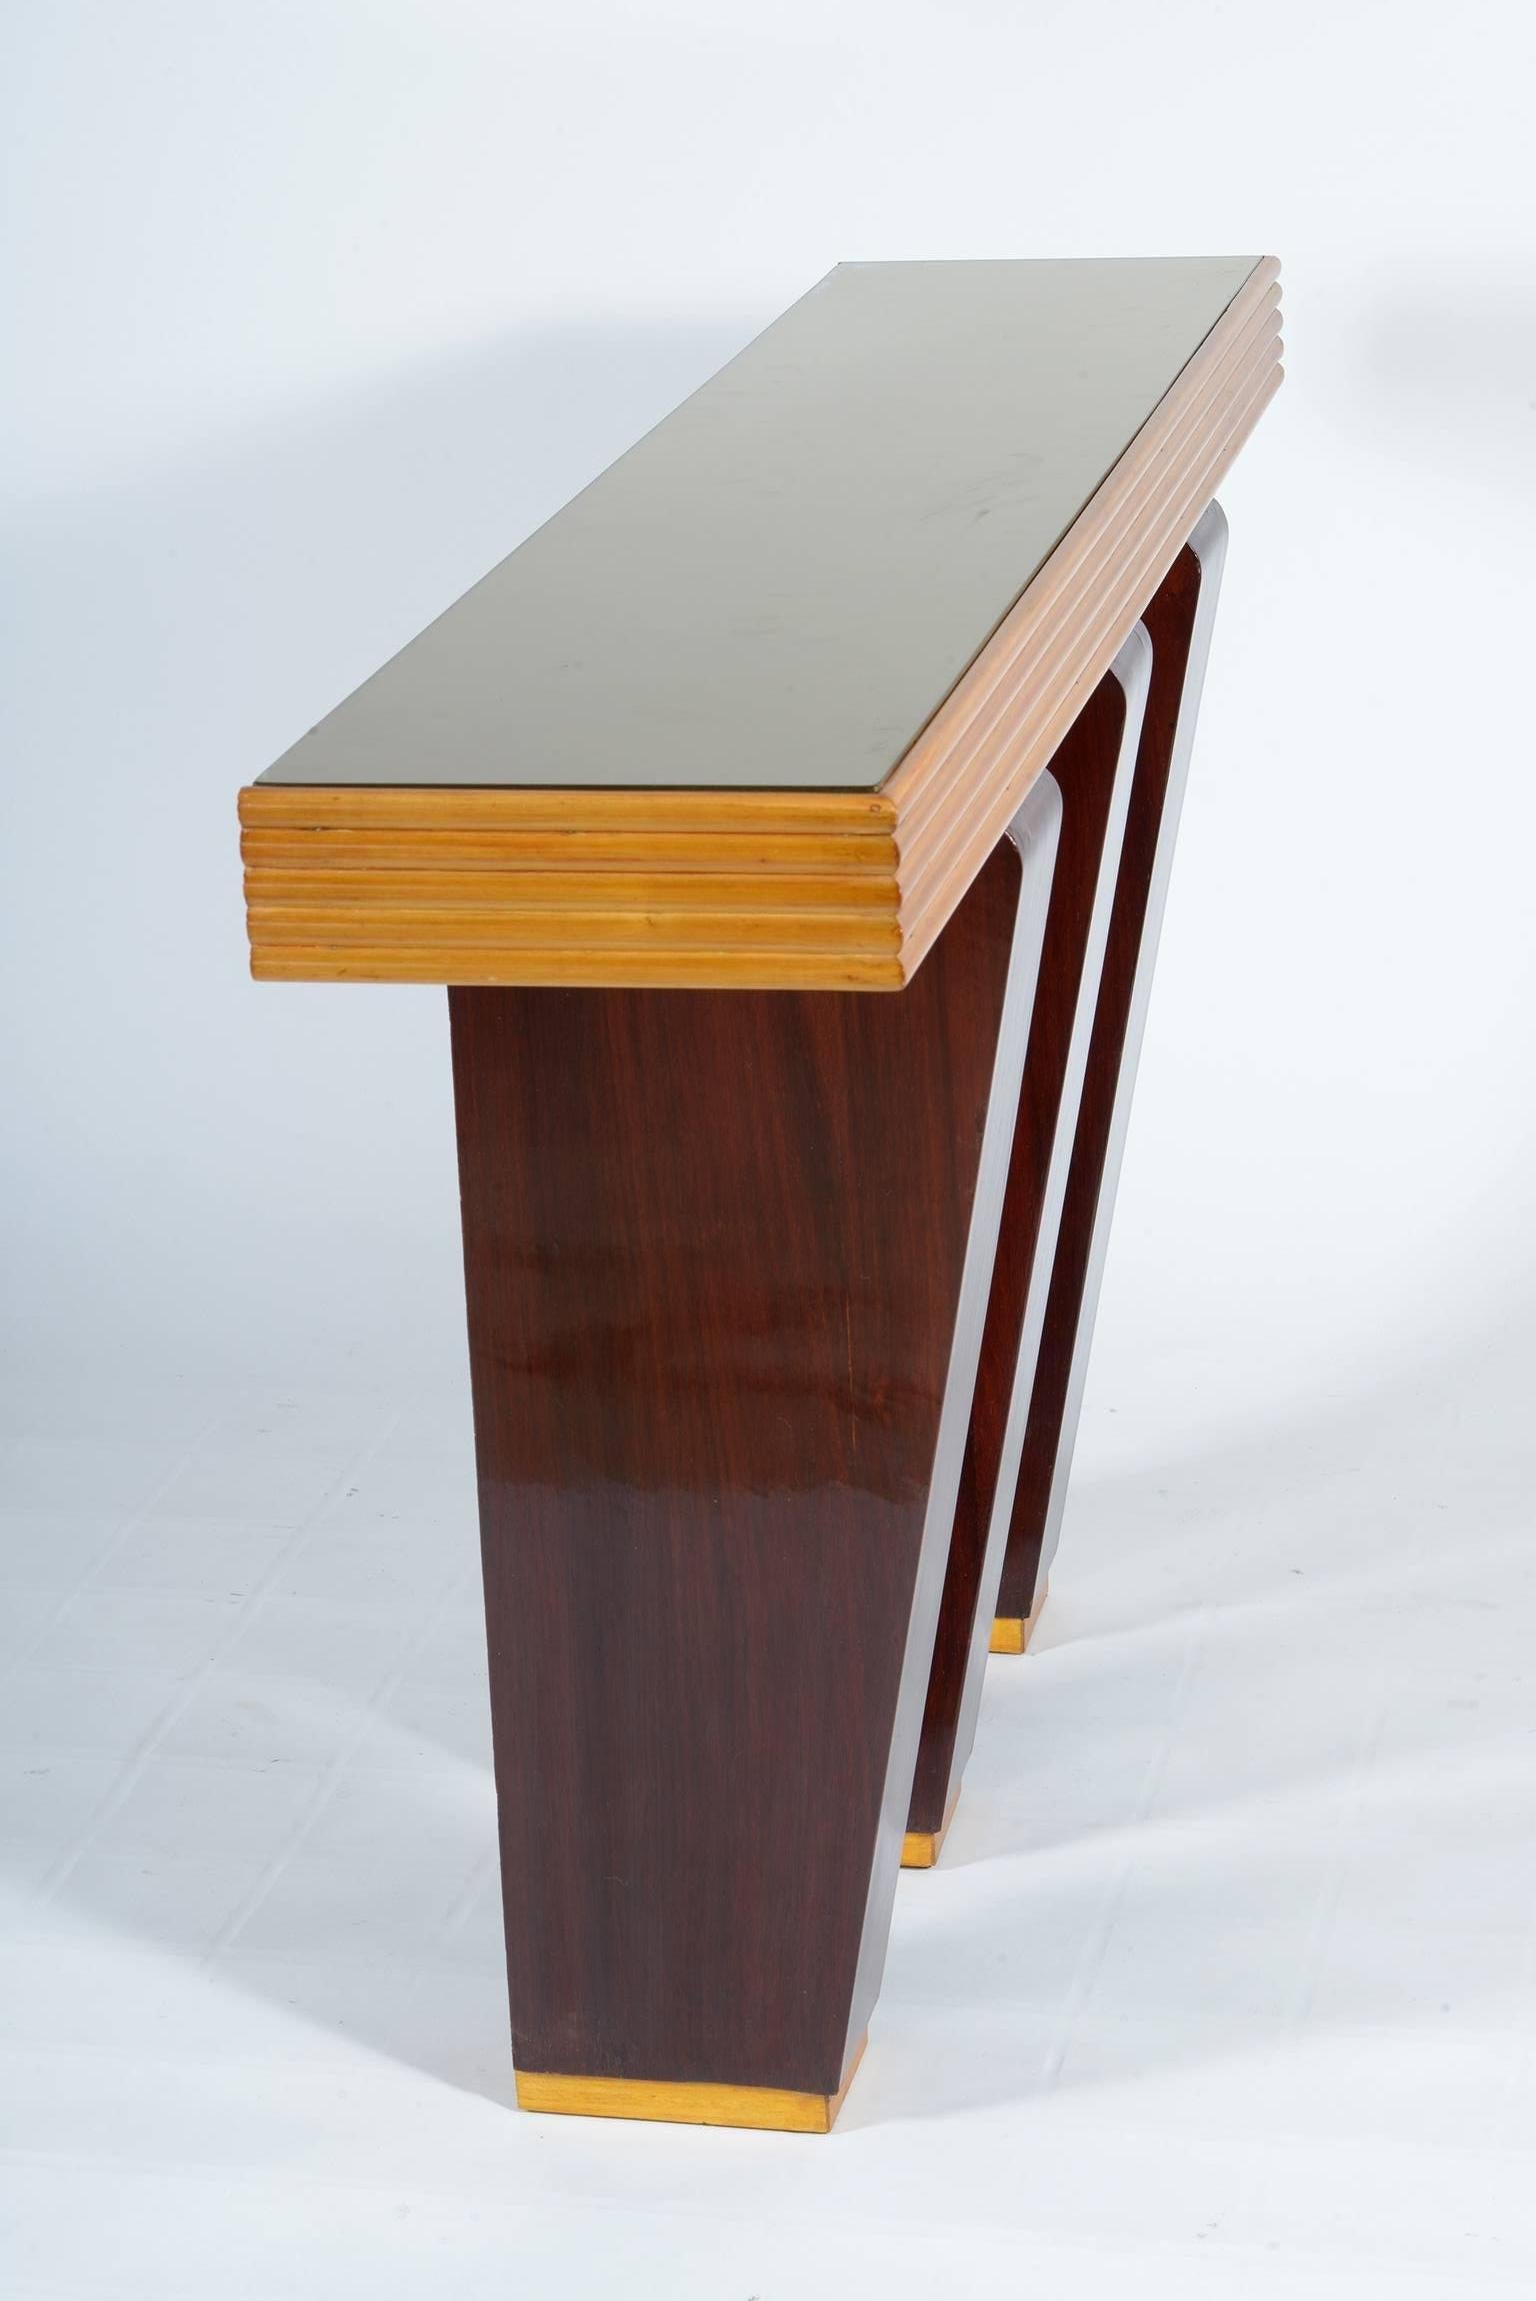 Rationalist Italian console in maples wood and amarant, three inclined legs support a plan with grooved edge.
Golden glass top.
Designed by the Architect Cesare Scoccimarro, circa 1938
Similar example is published in the book: Arredamento Moderno